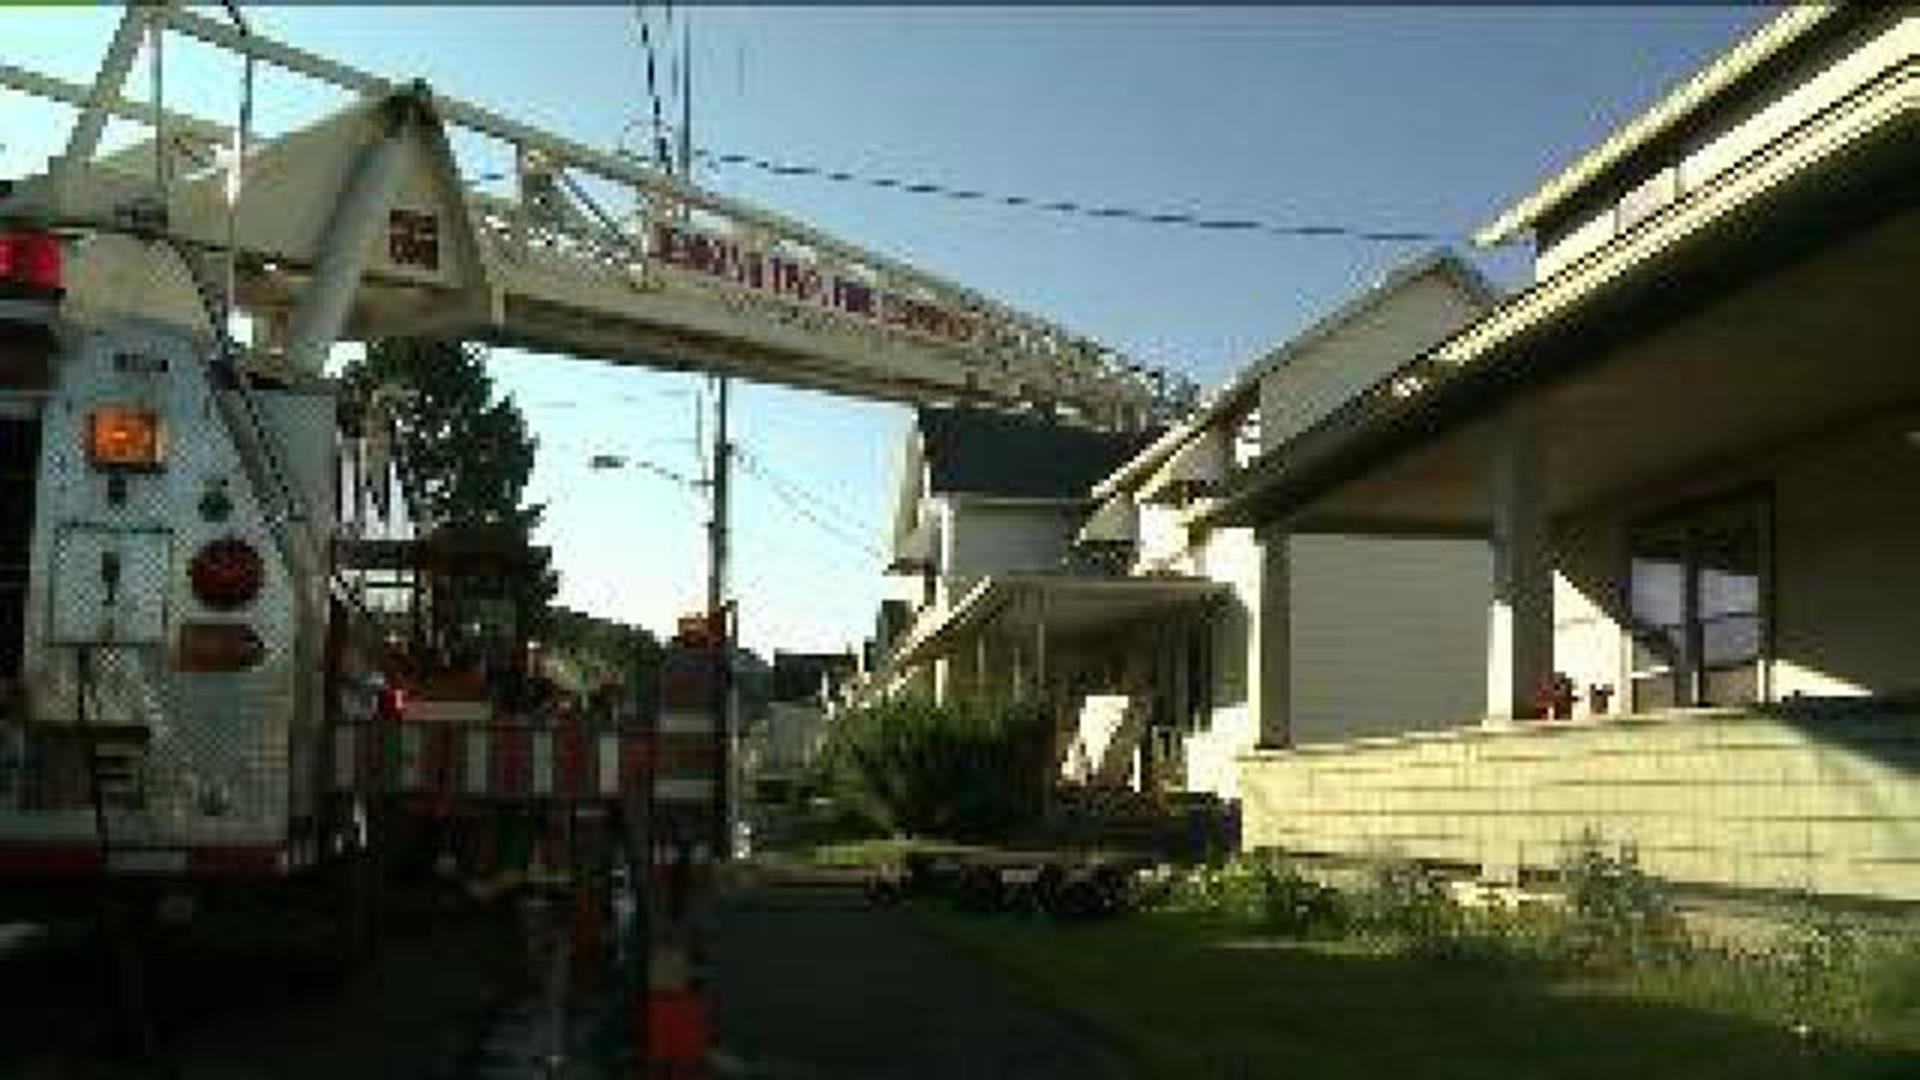 Man Rescued from Roof after Fire